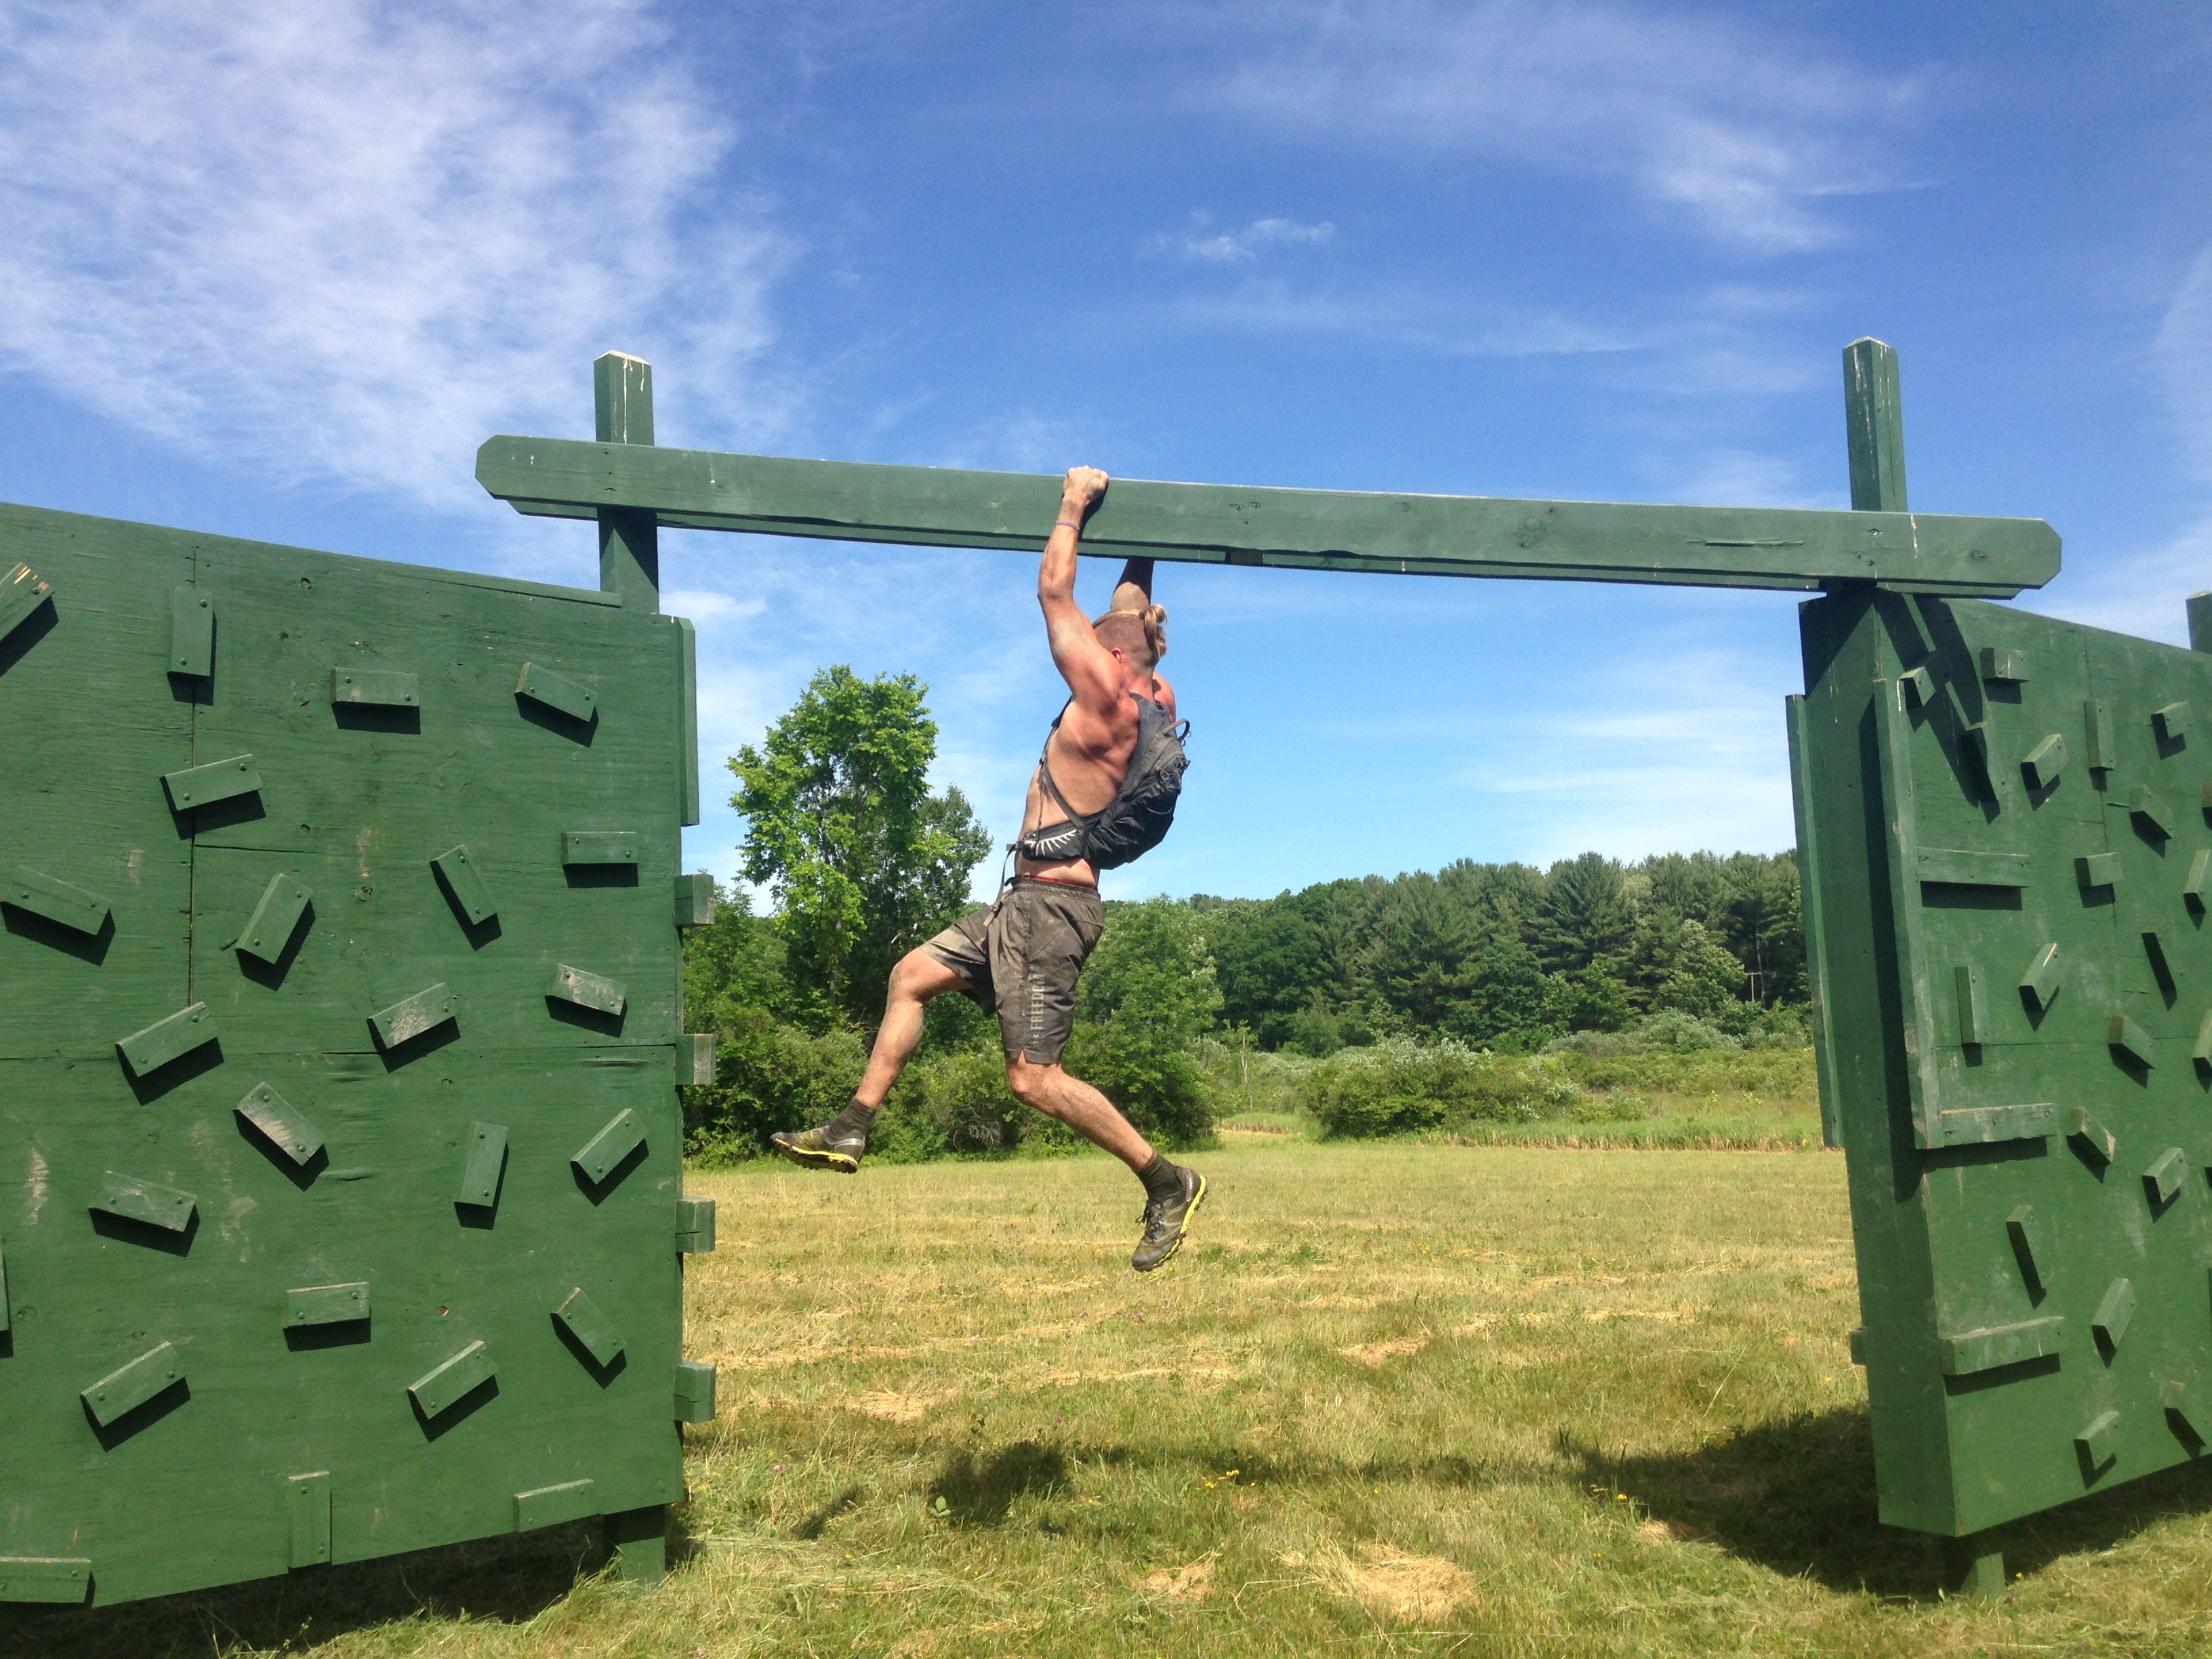 Neil Cary completing on his laps at Viking OCR. He would complete 36 miles over two days.